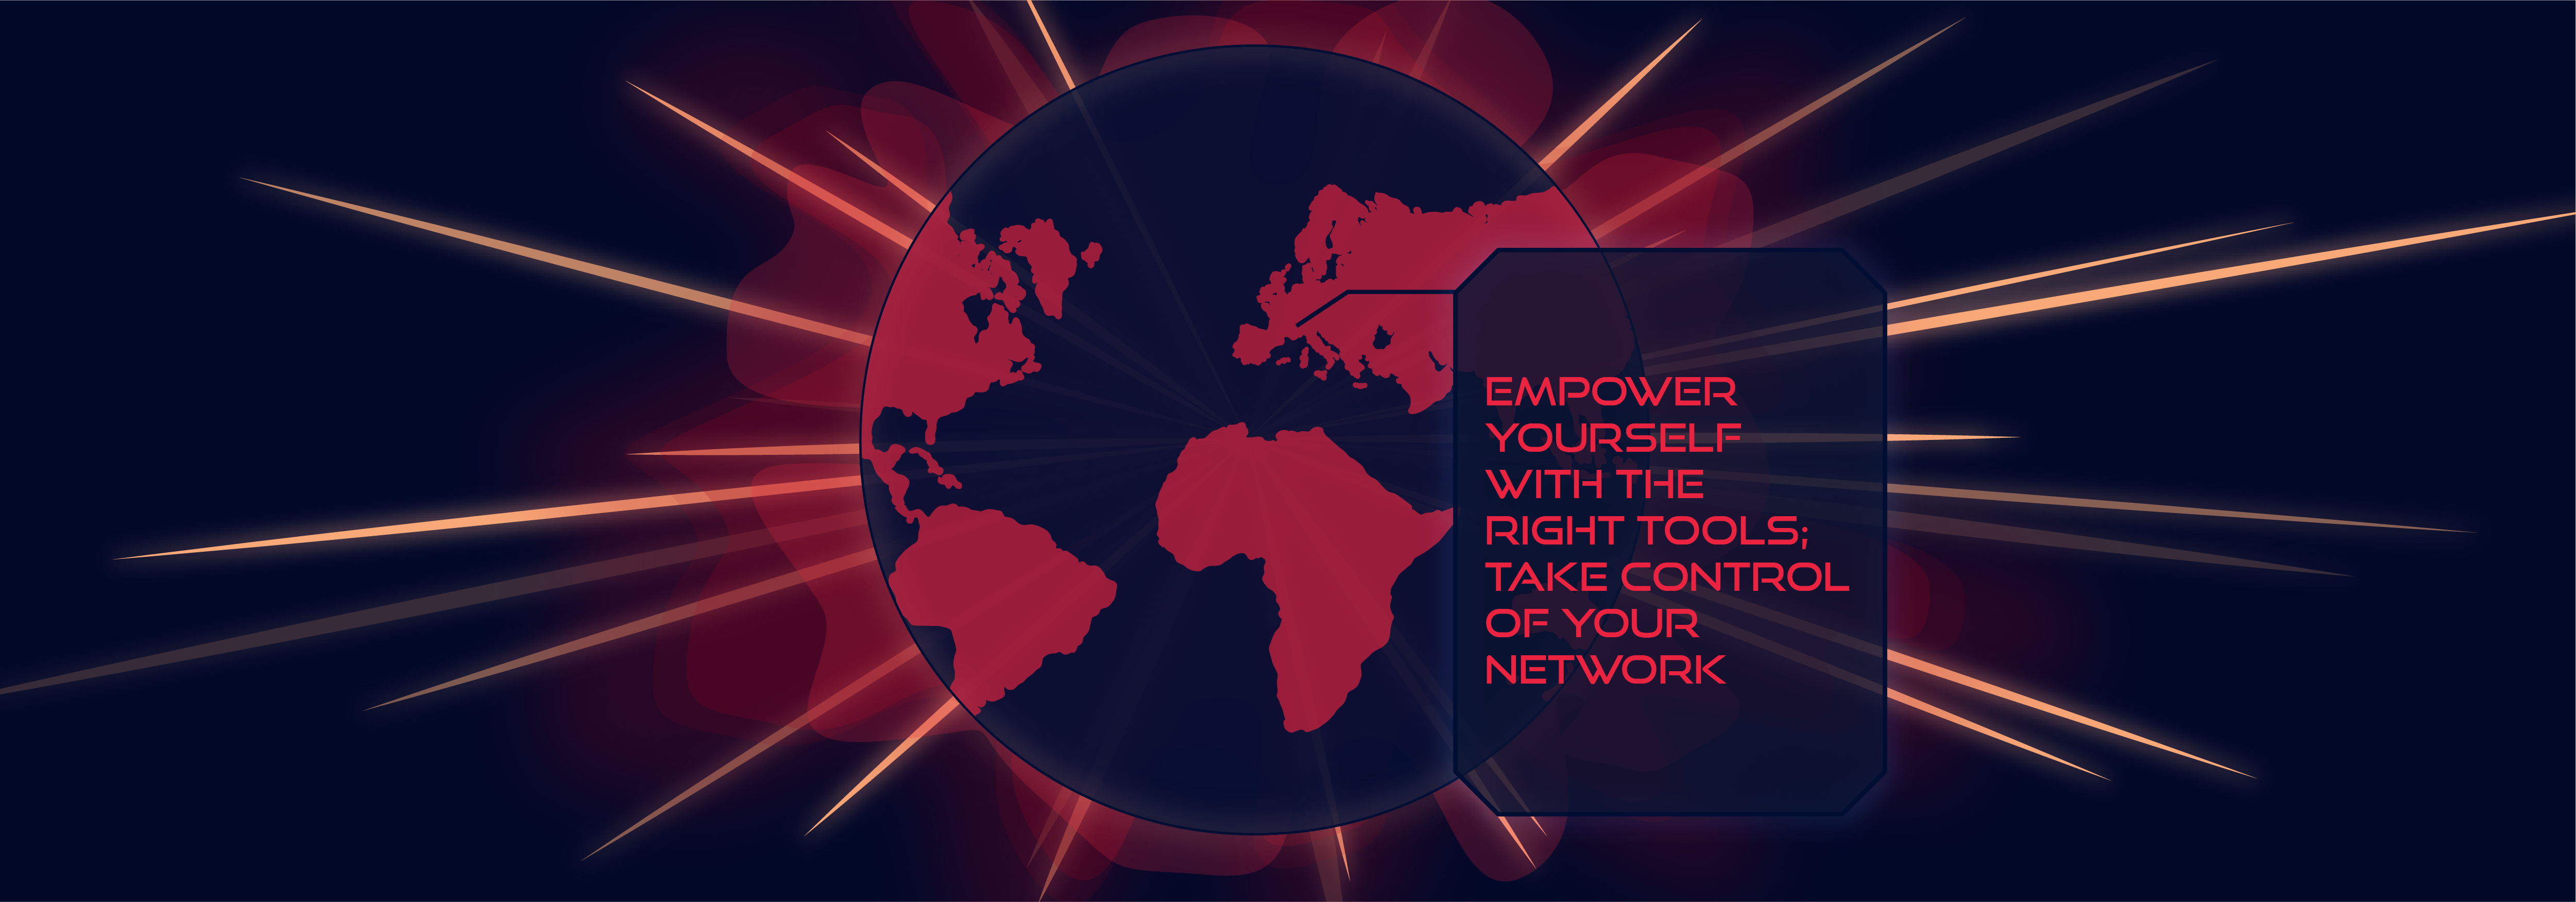 Empower yourself with the right tools; take control of your network